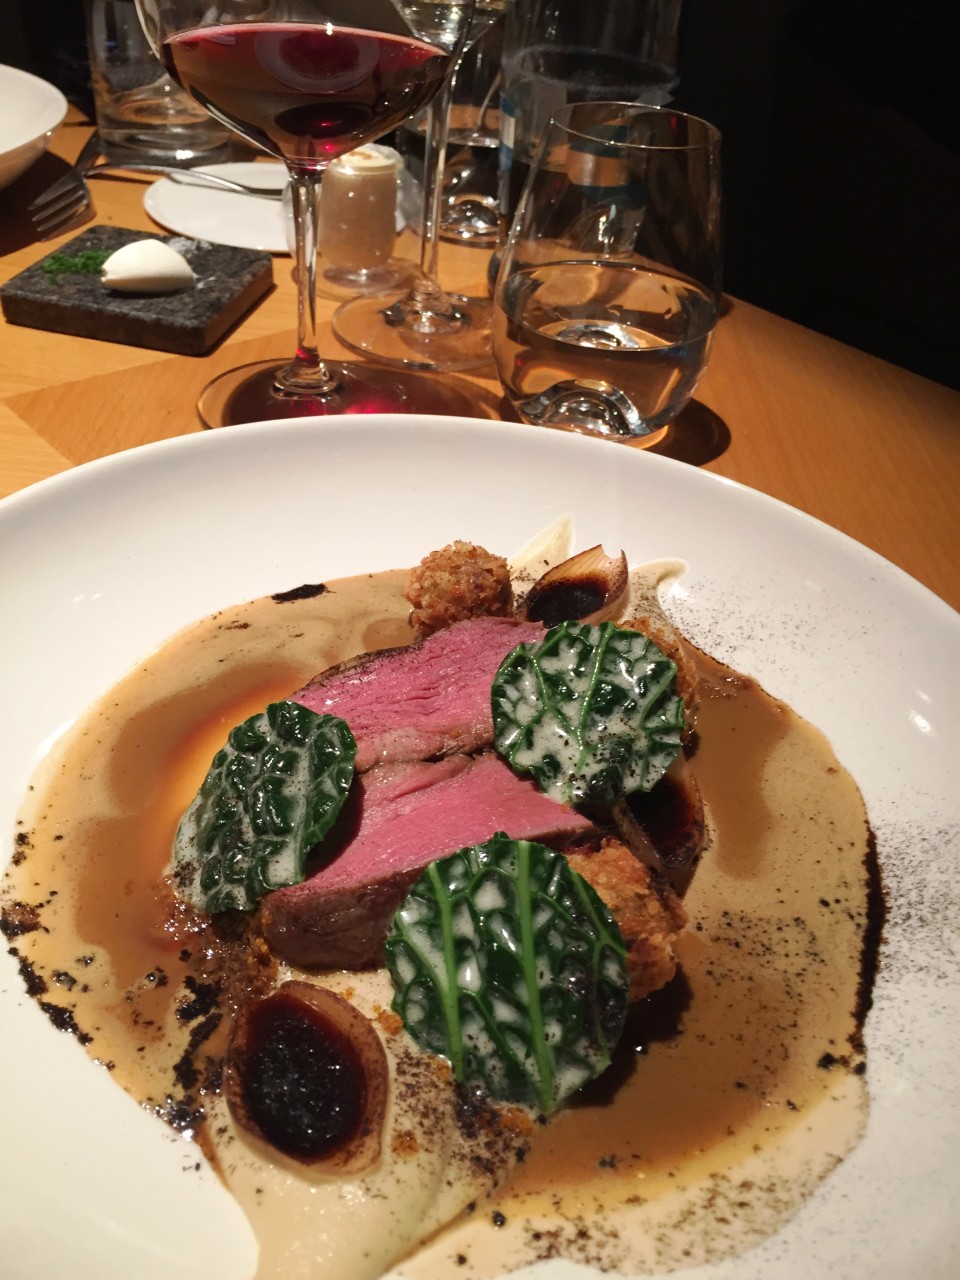 Field Restaurant in Prague : Main course of Veal, marrrow, shallots, kale